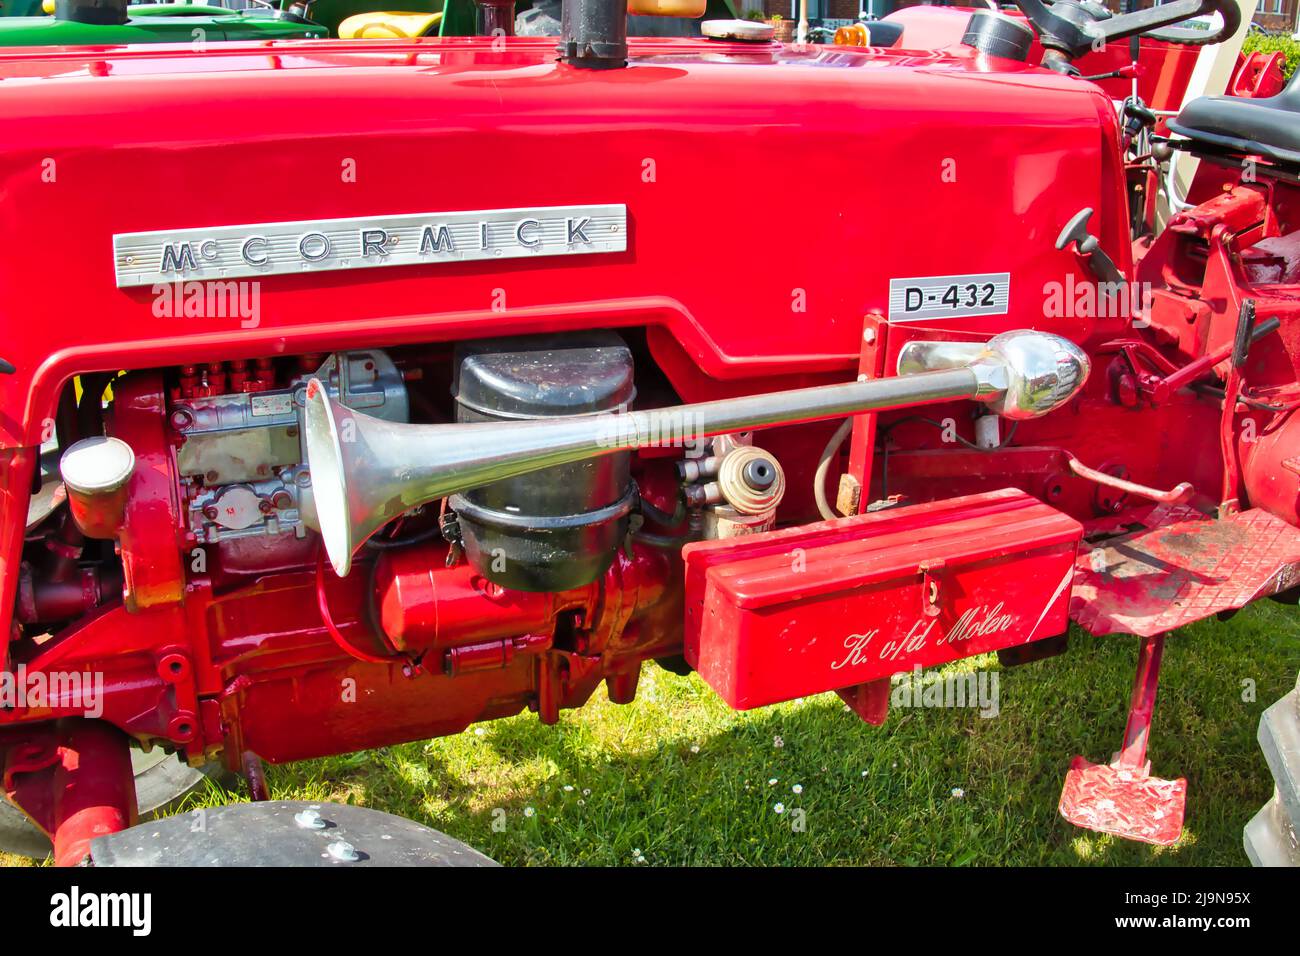 Engine and classic chrome horn of a vintage McCormick D423 tractor at a classic car show in Uithuizen, Groningen, the Netherlands Stock Photo